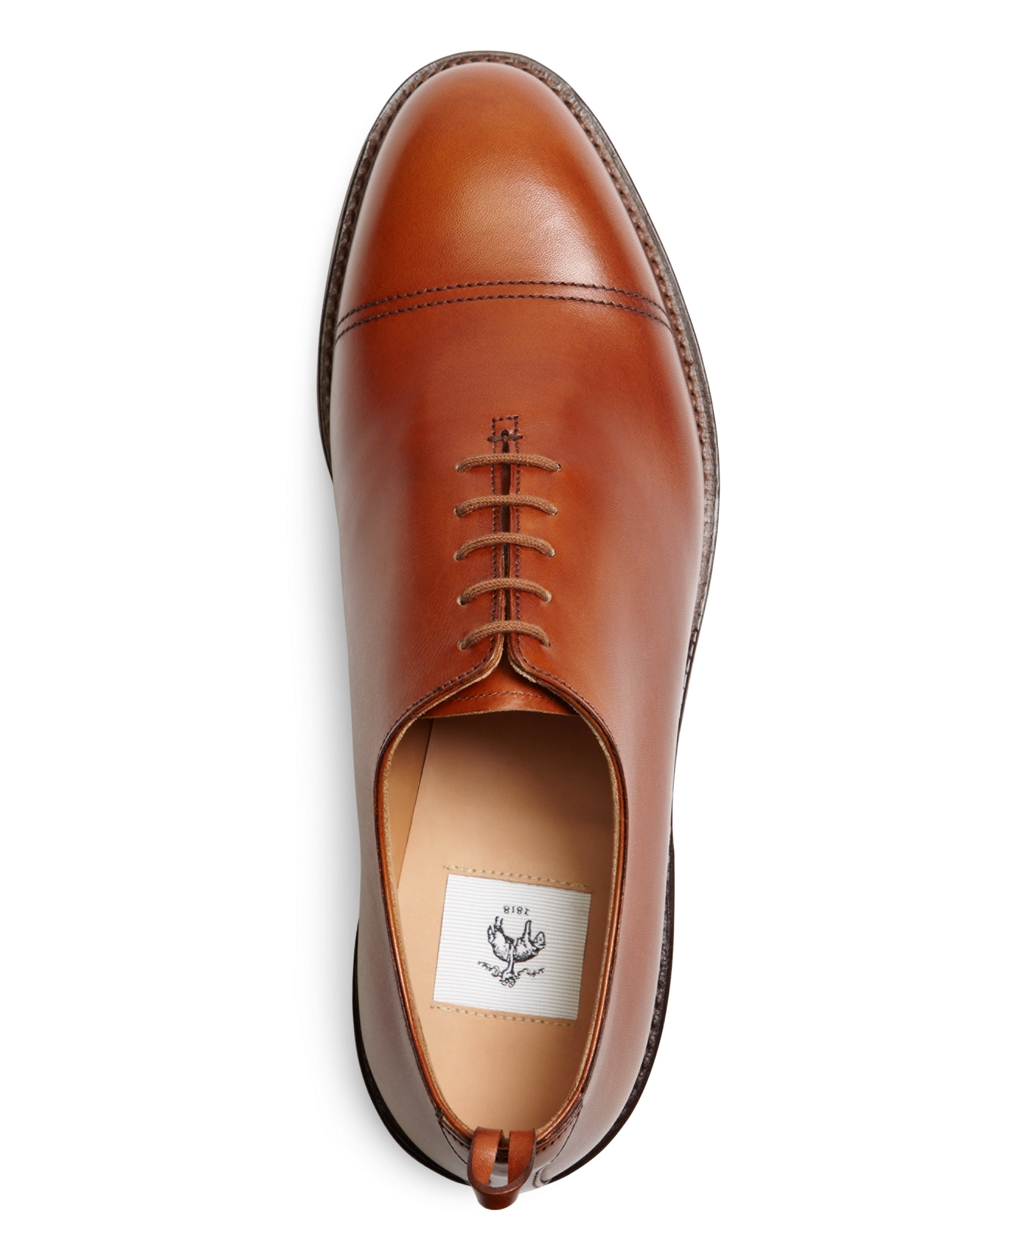 Lyst - Brooks Brothers Calfskin Cap Toe Shoes in Brown for Men